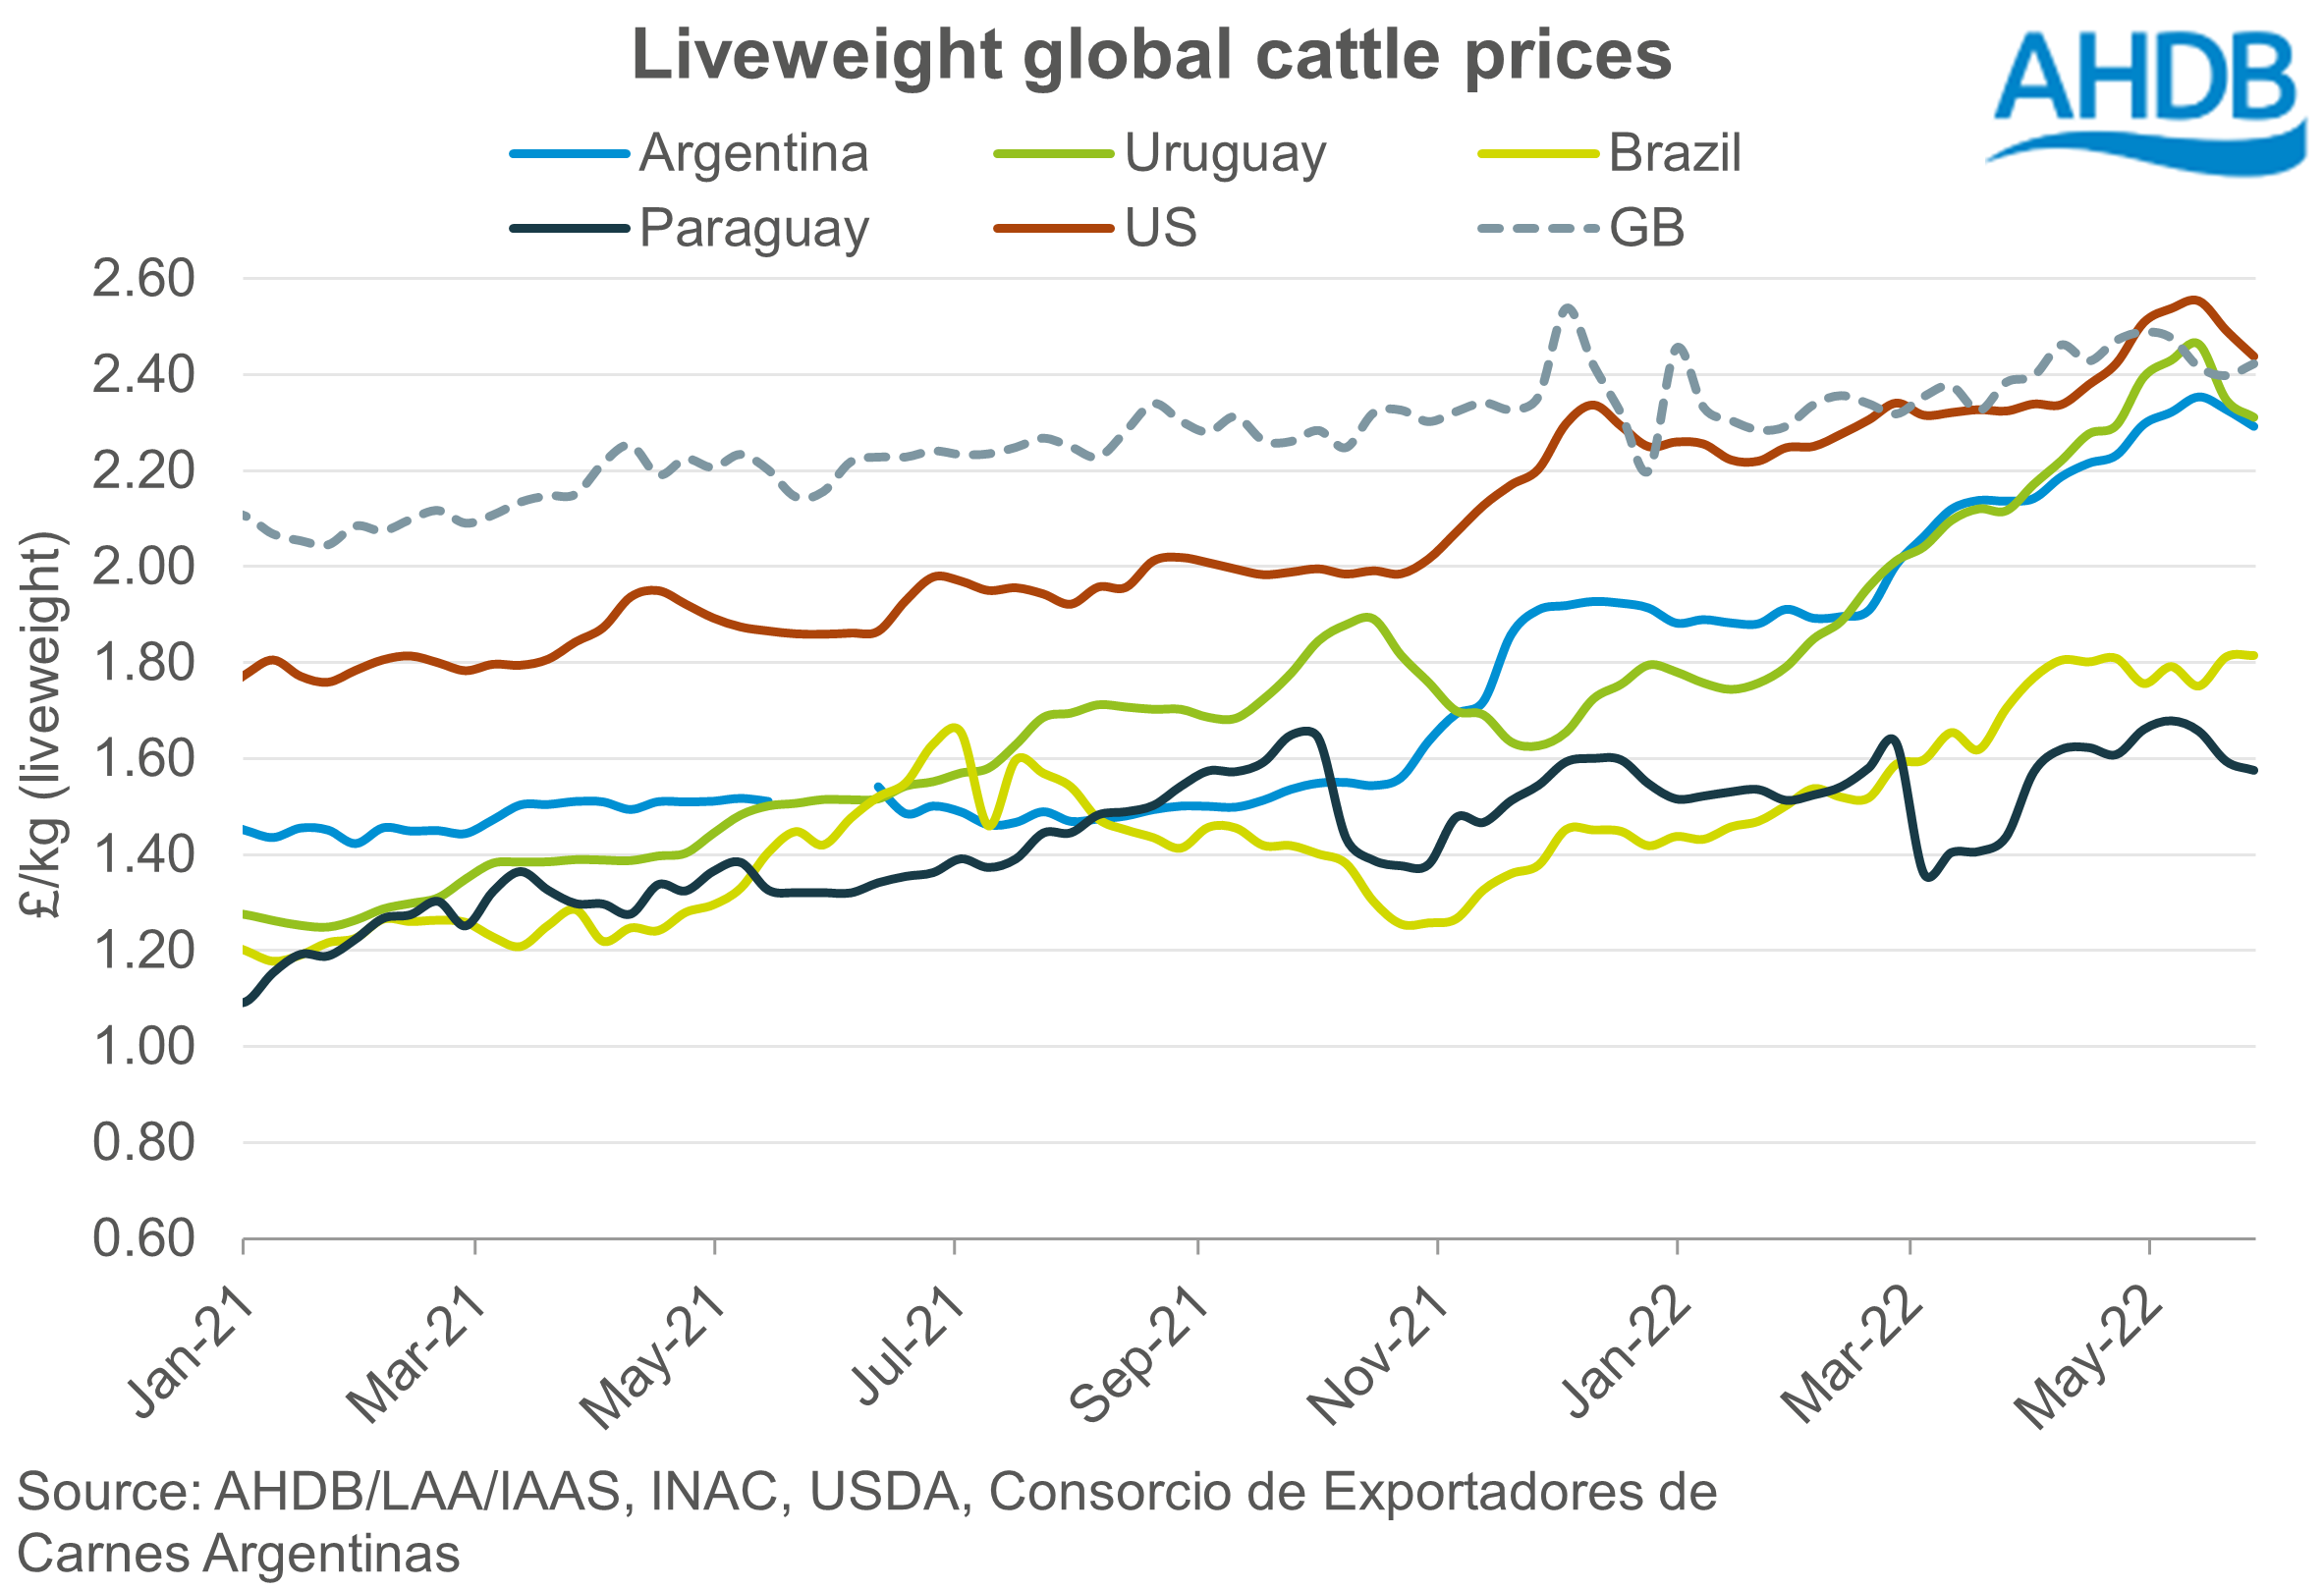 Graph showing global liveweight cattle prices in GBP up to June 2022